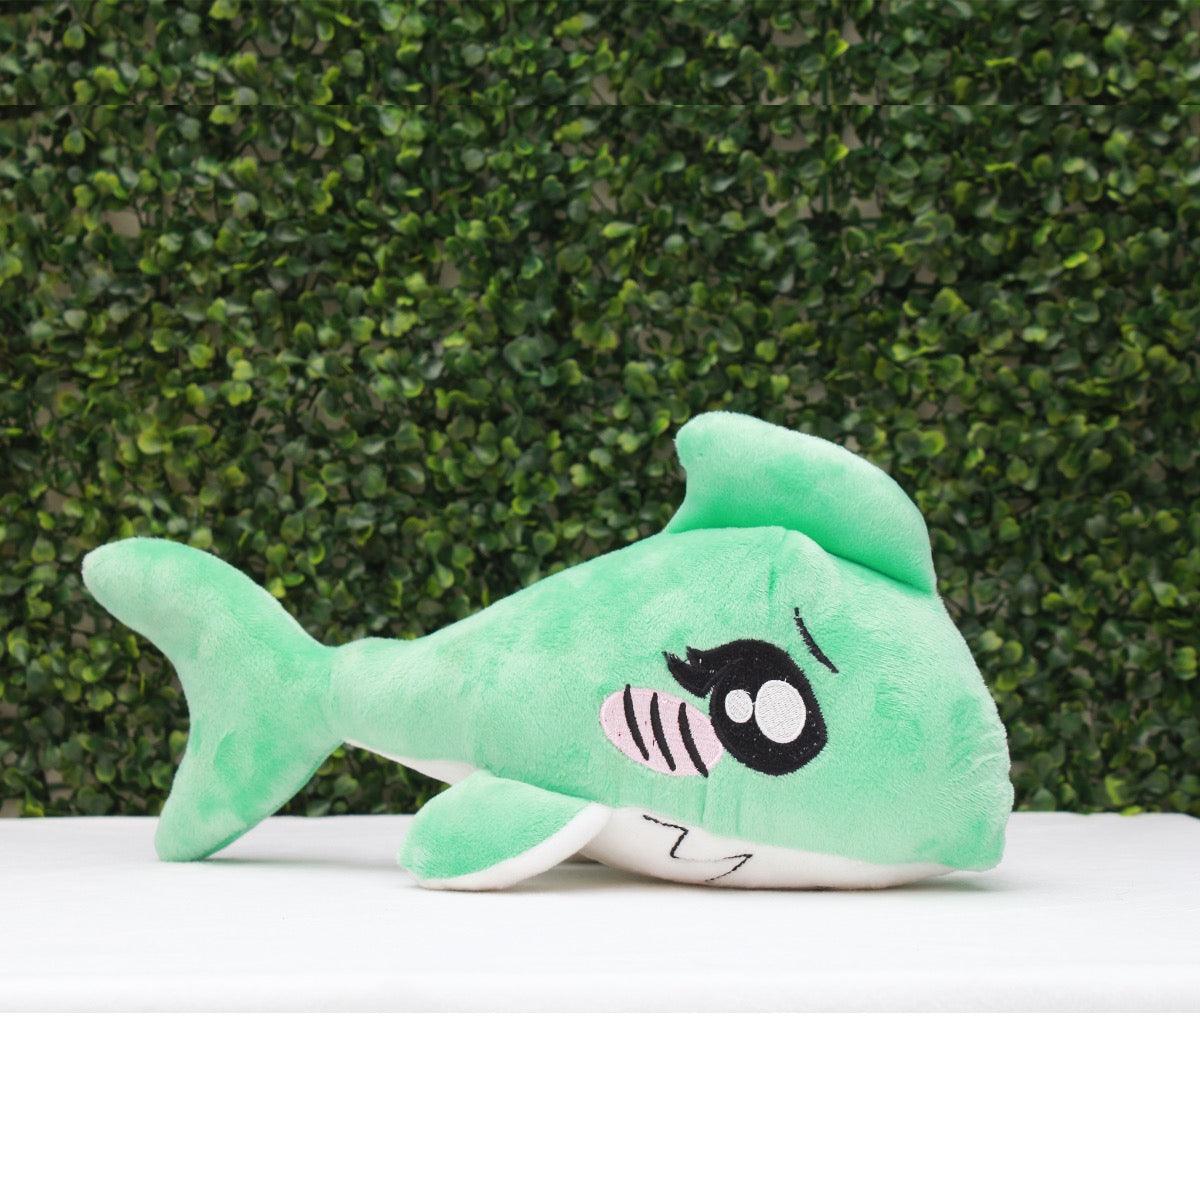 Plushkins Shark, Premium Green & White Soft Toy for Kids, Aged 1-10 years, Extra Soft Stuffed Toy with Plyfibre Stuffing